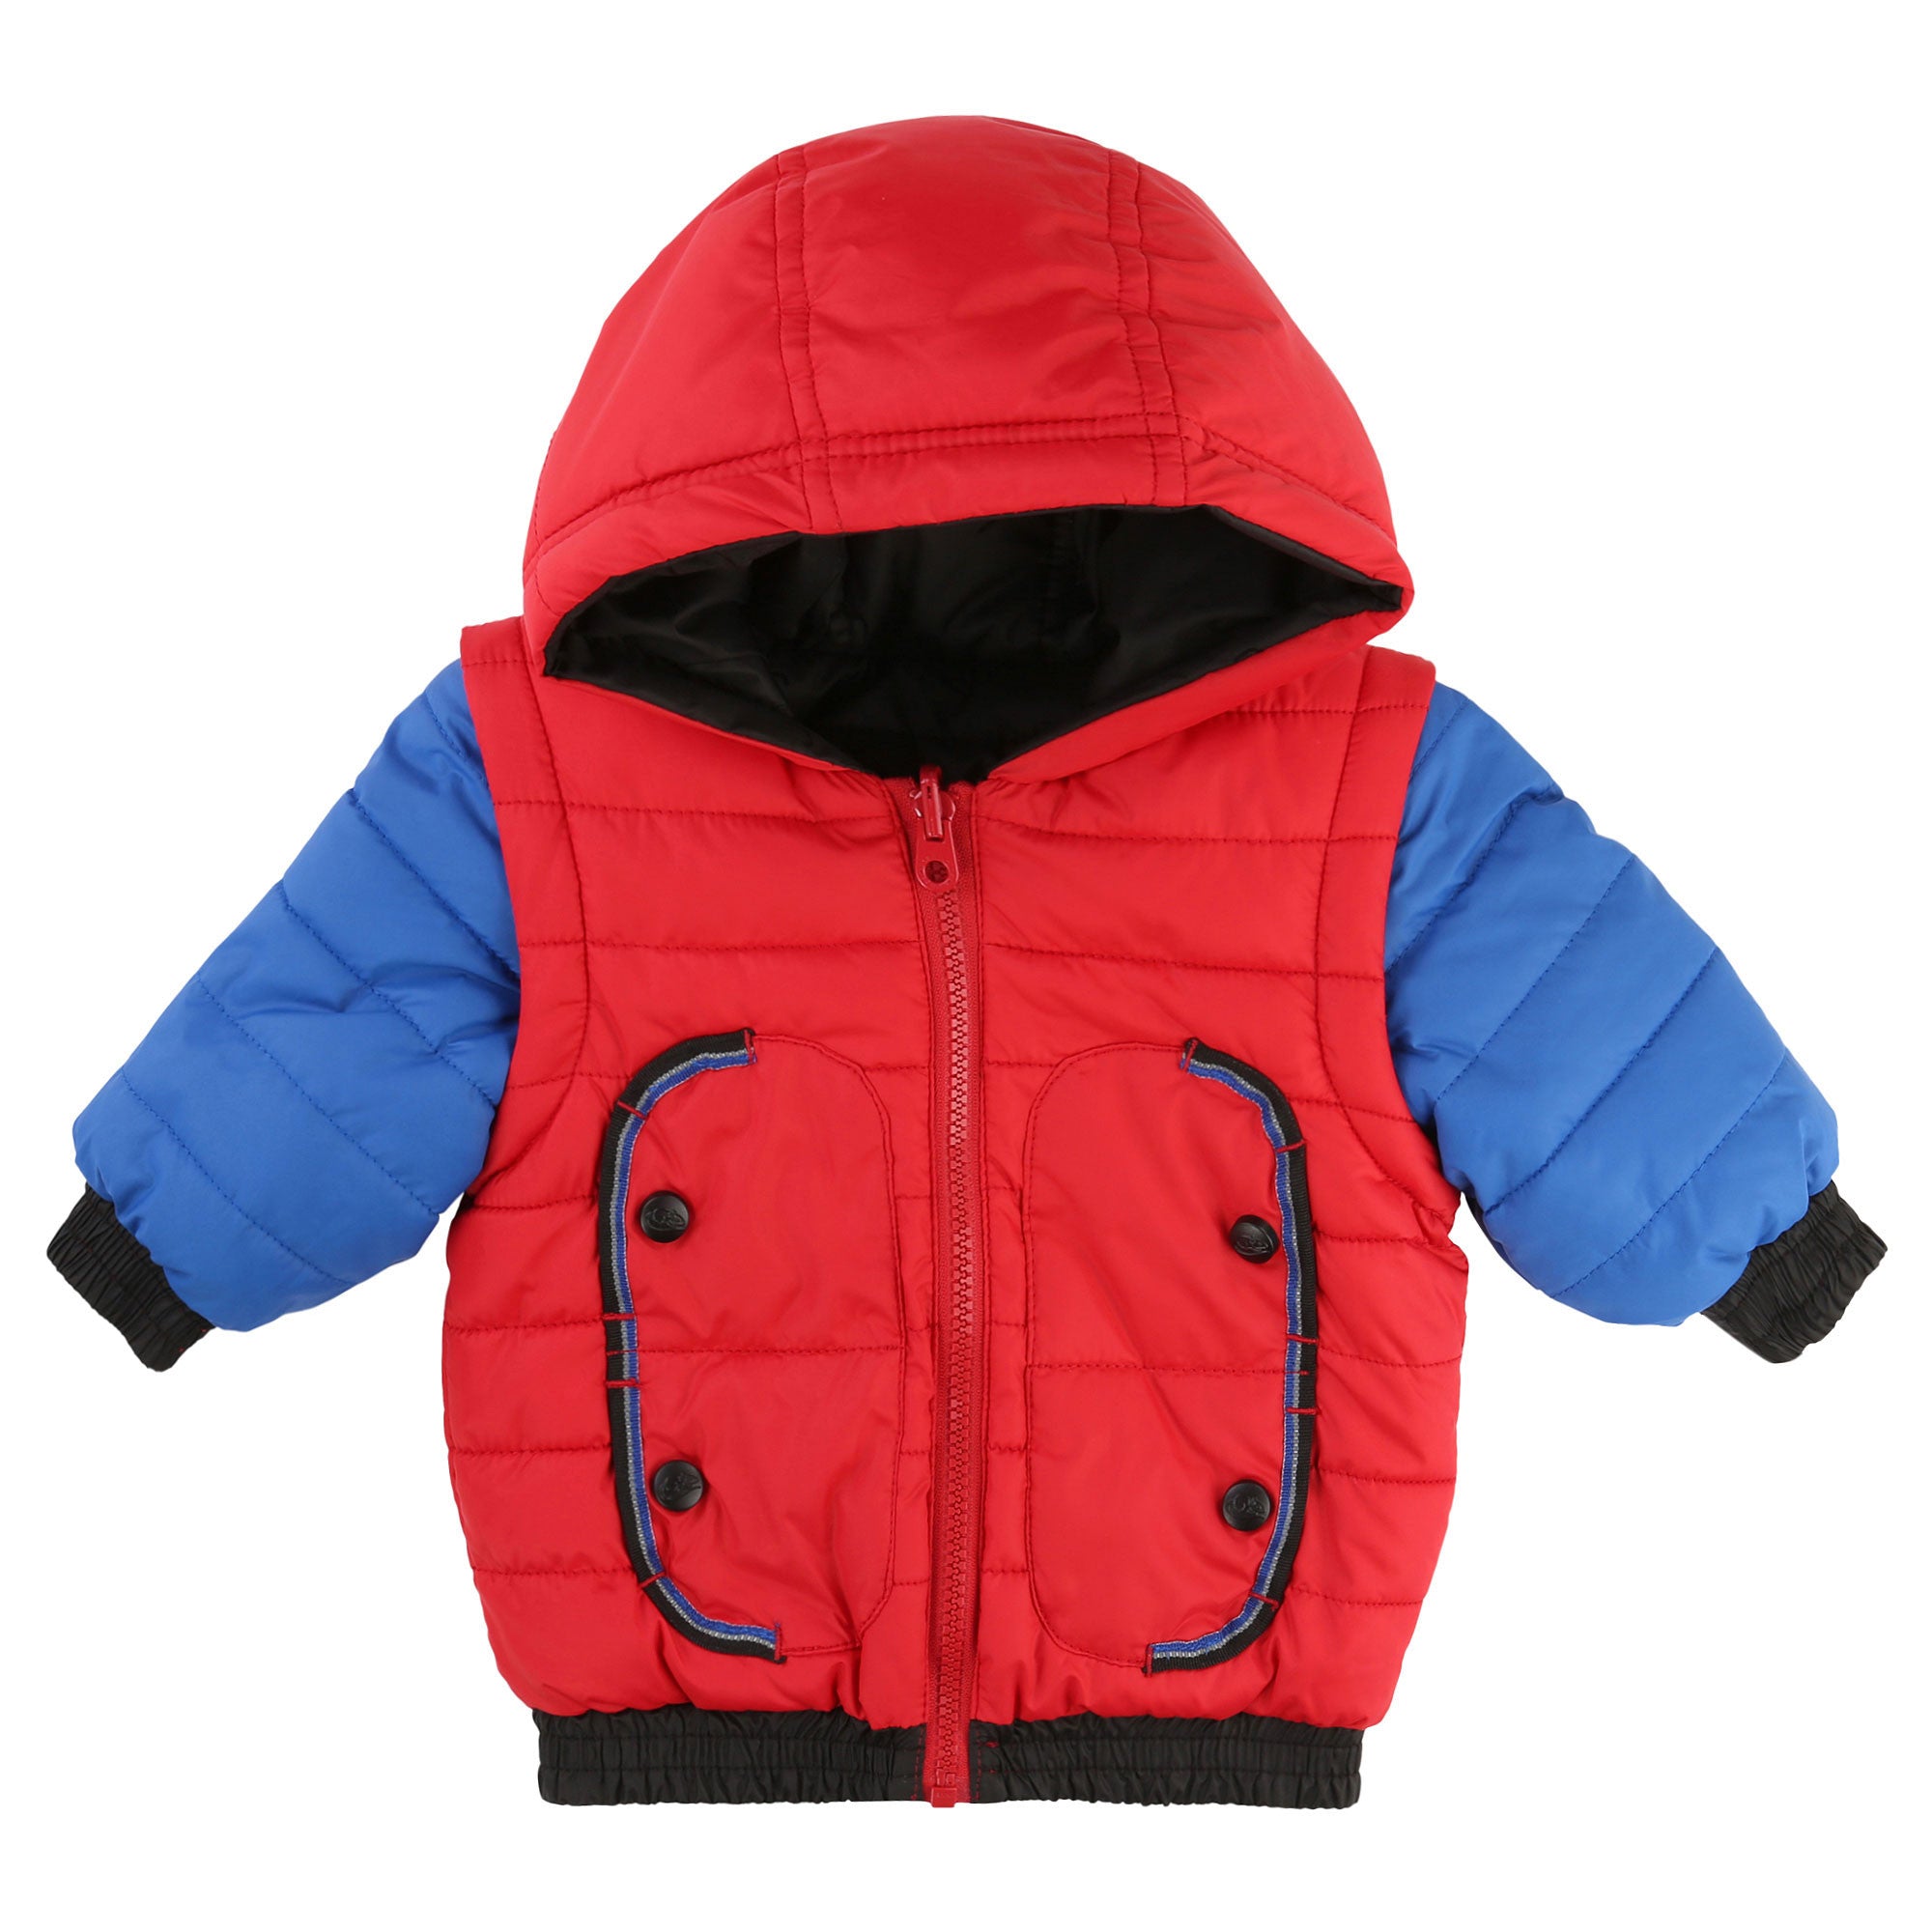 Boys Red Hooded Remove The Sleeves Down Jacket - CÉMAROSE | Children's Fashion Store - 1